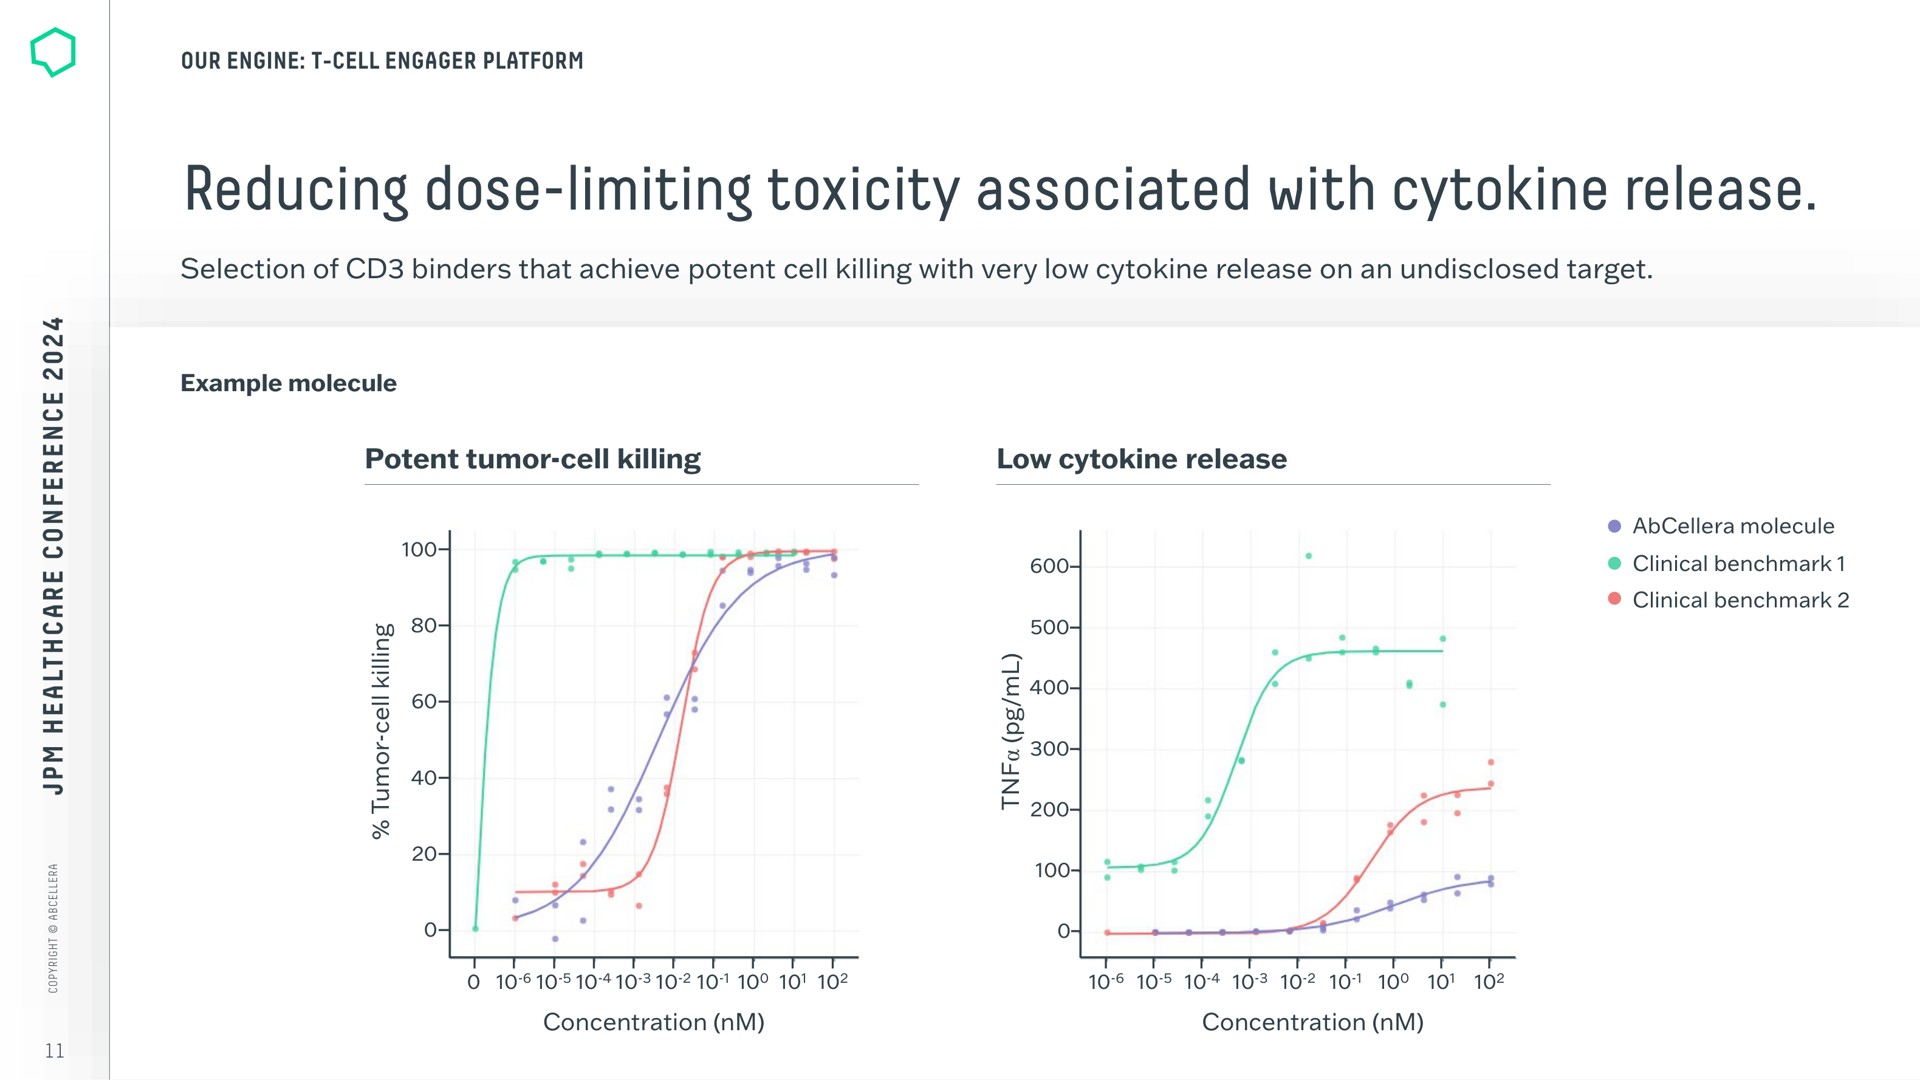 reducing dose limiting toxicity associated with release selection of binders that achieve potent cell killing very low on an undisclosed target potent tumor cell killing low | AbCellera